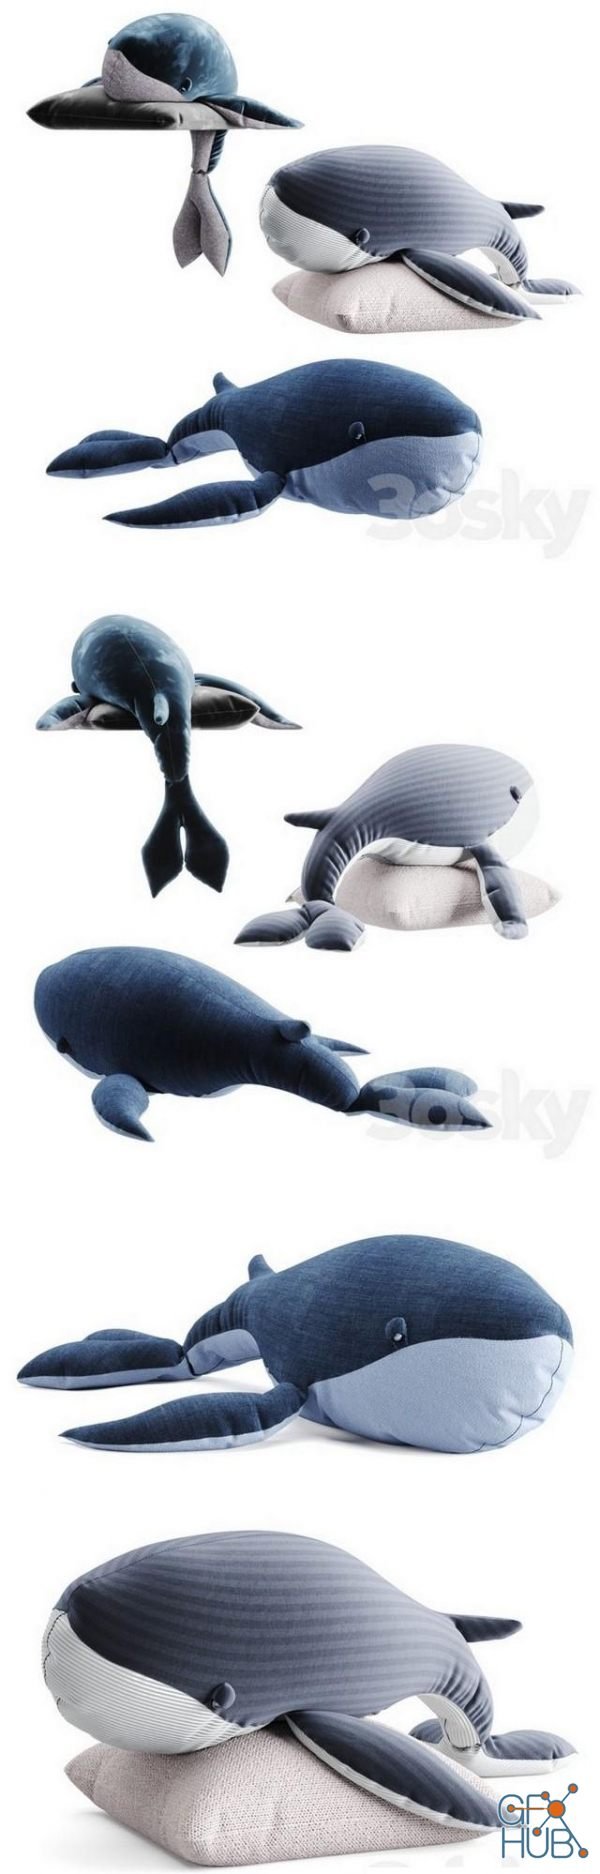 Whale toy set